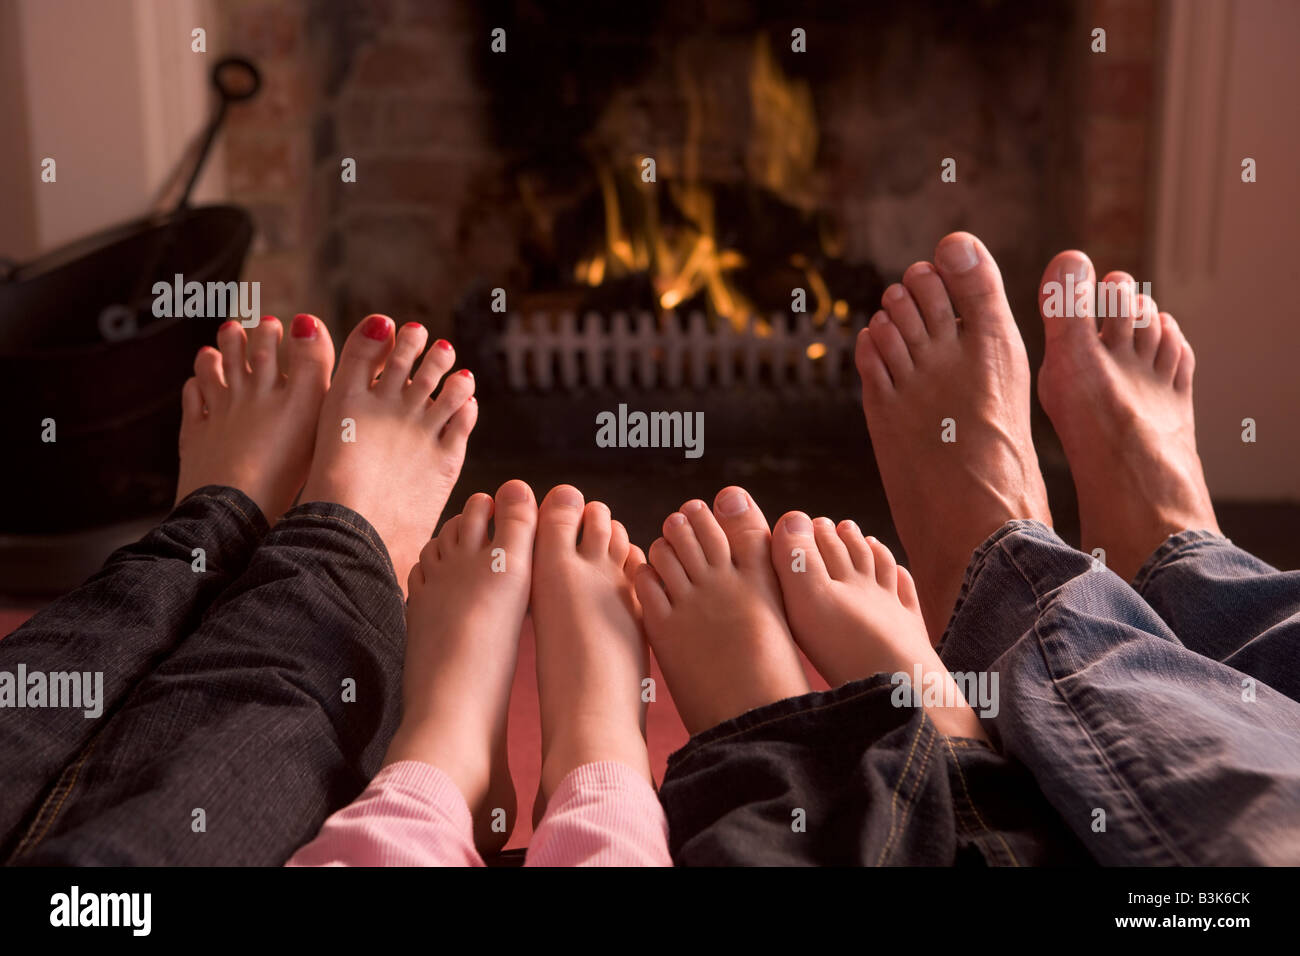 Family of feet warming at a fireplace Stock Photo